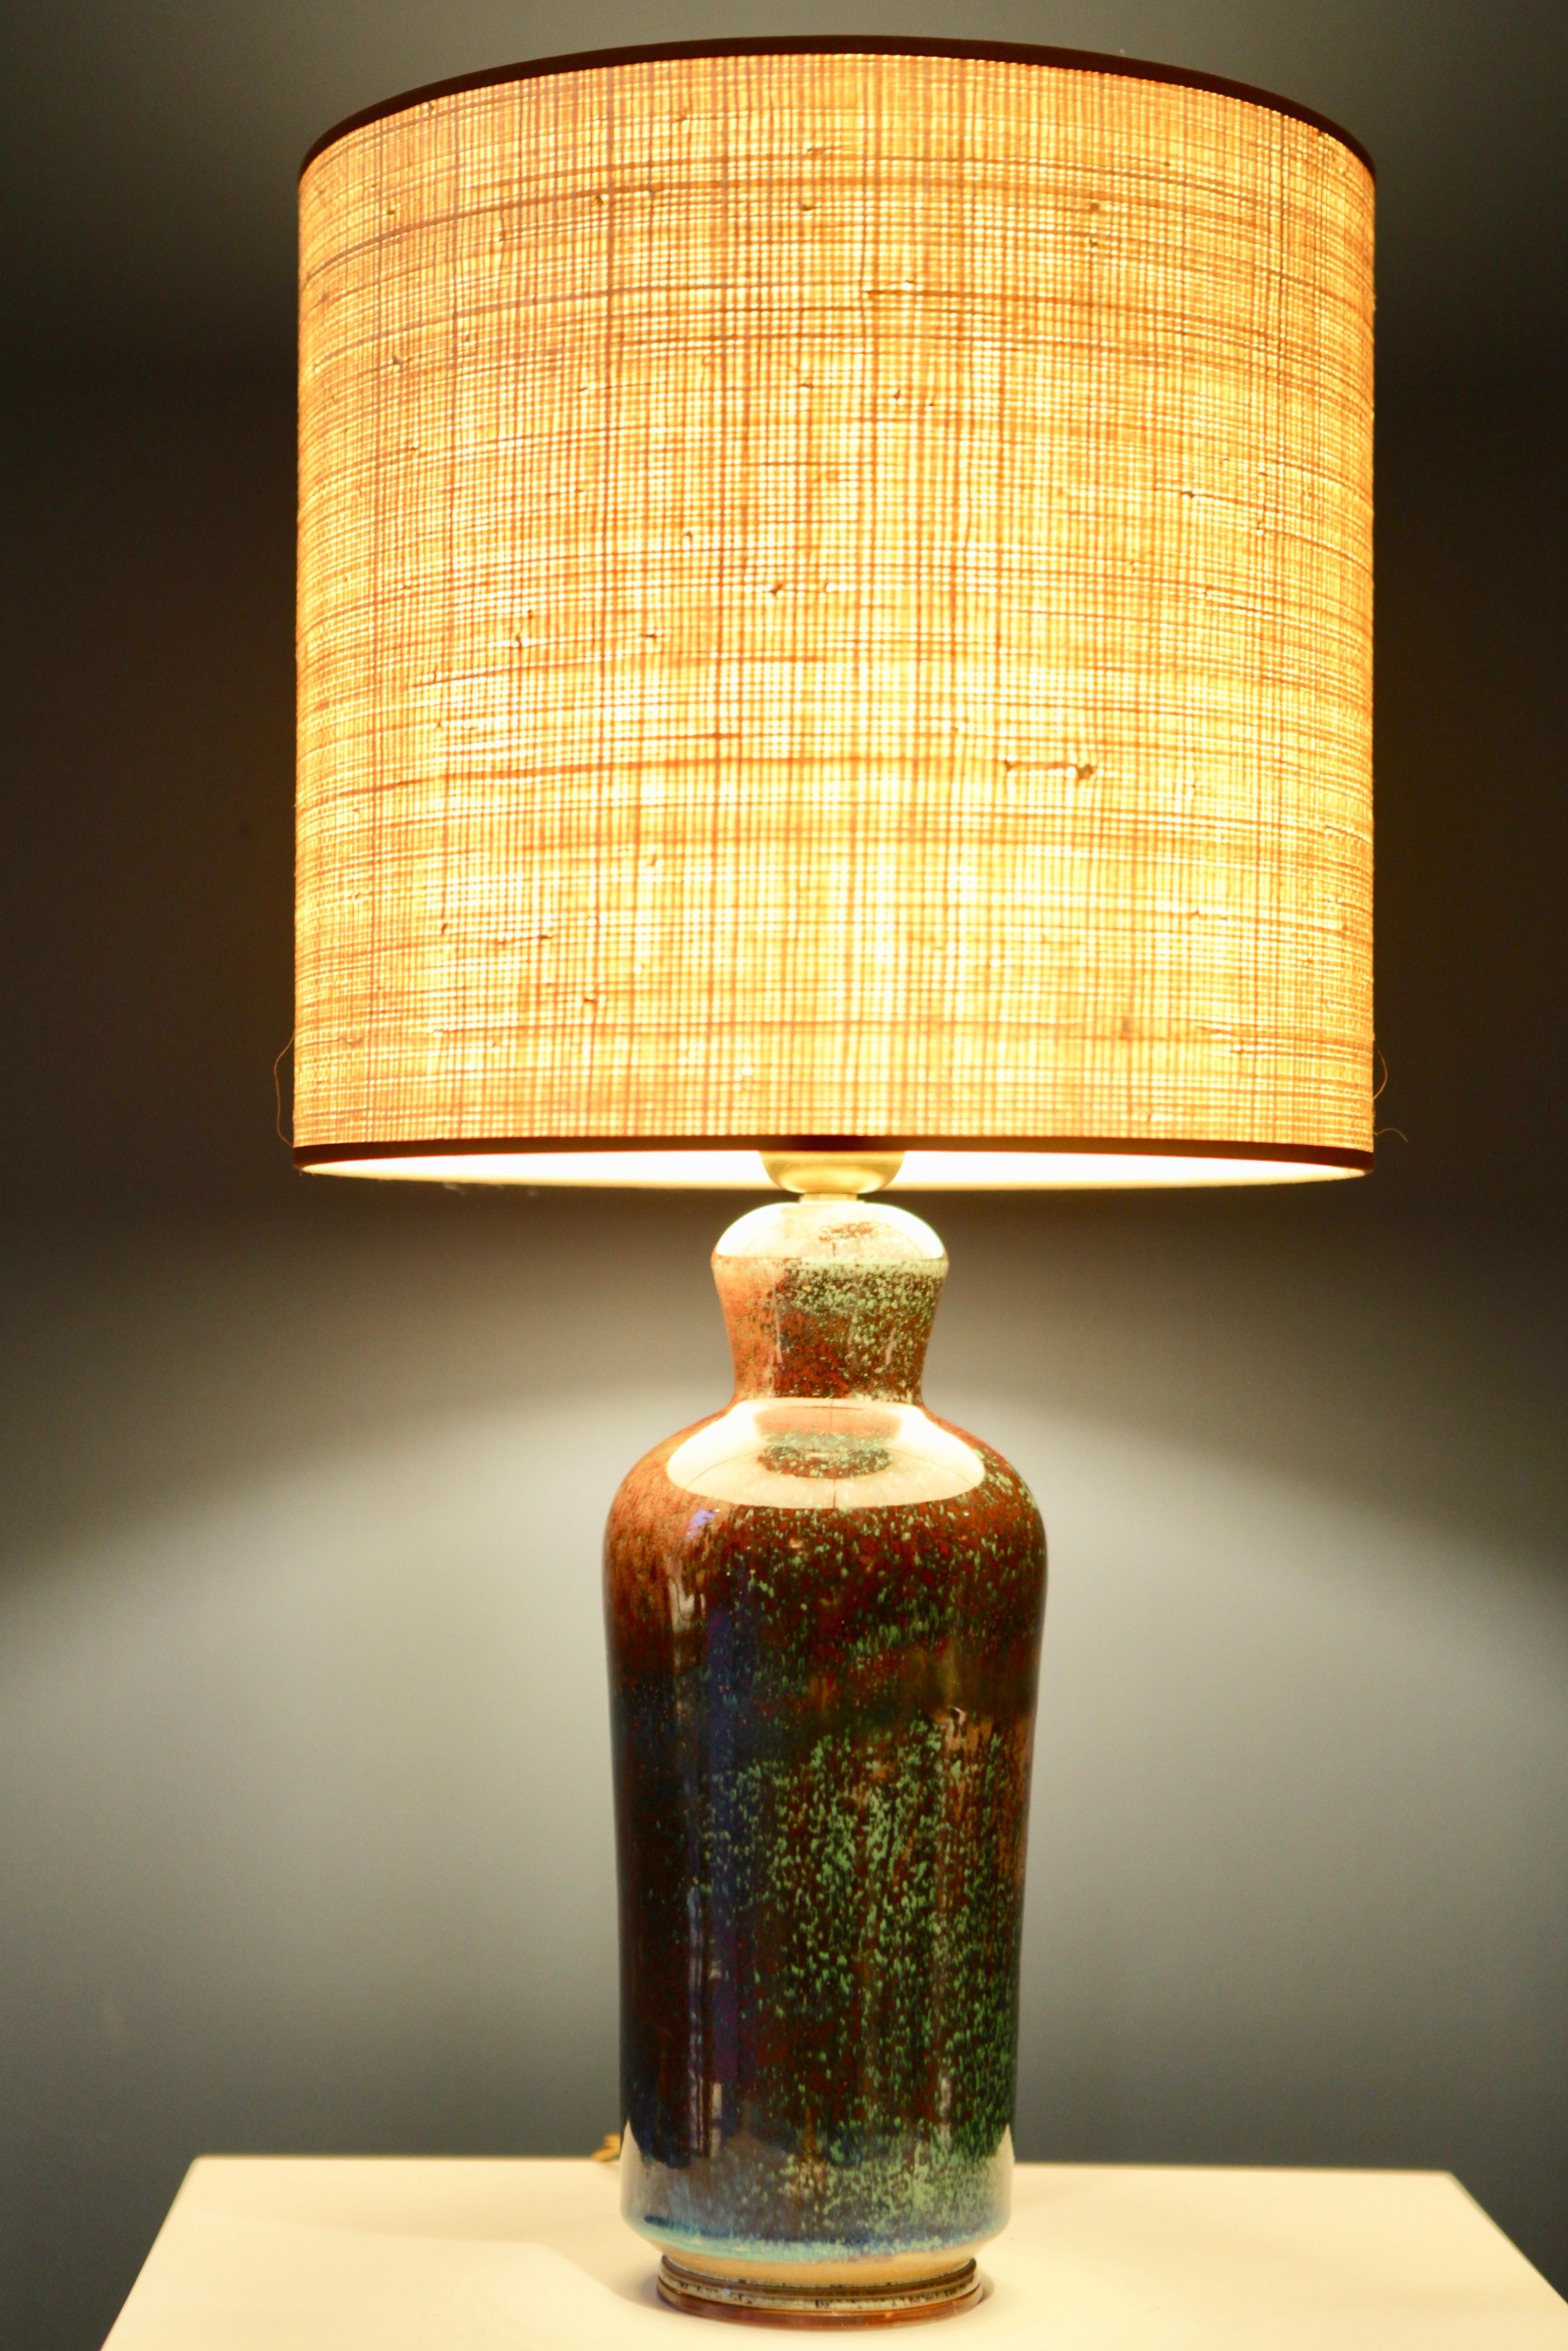 Berndt Friberg, green, turquoise and brown glazed stoneware table lamp,
Gustavsberg Studio, Sweden 1960s
Rewired, new handmade Raffia shade to be sold separate.
Excellent condition.